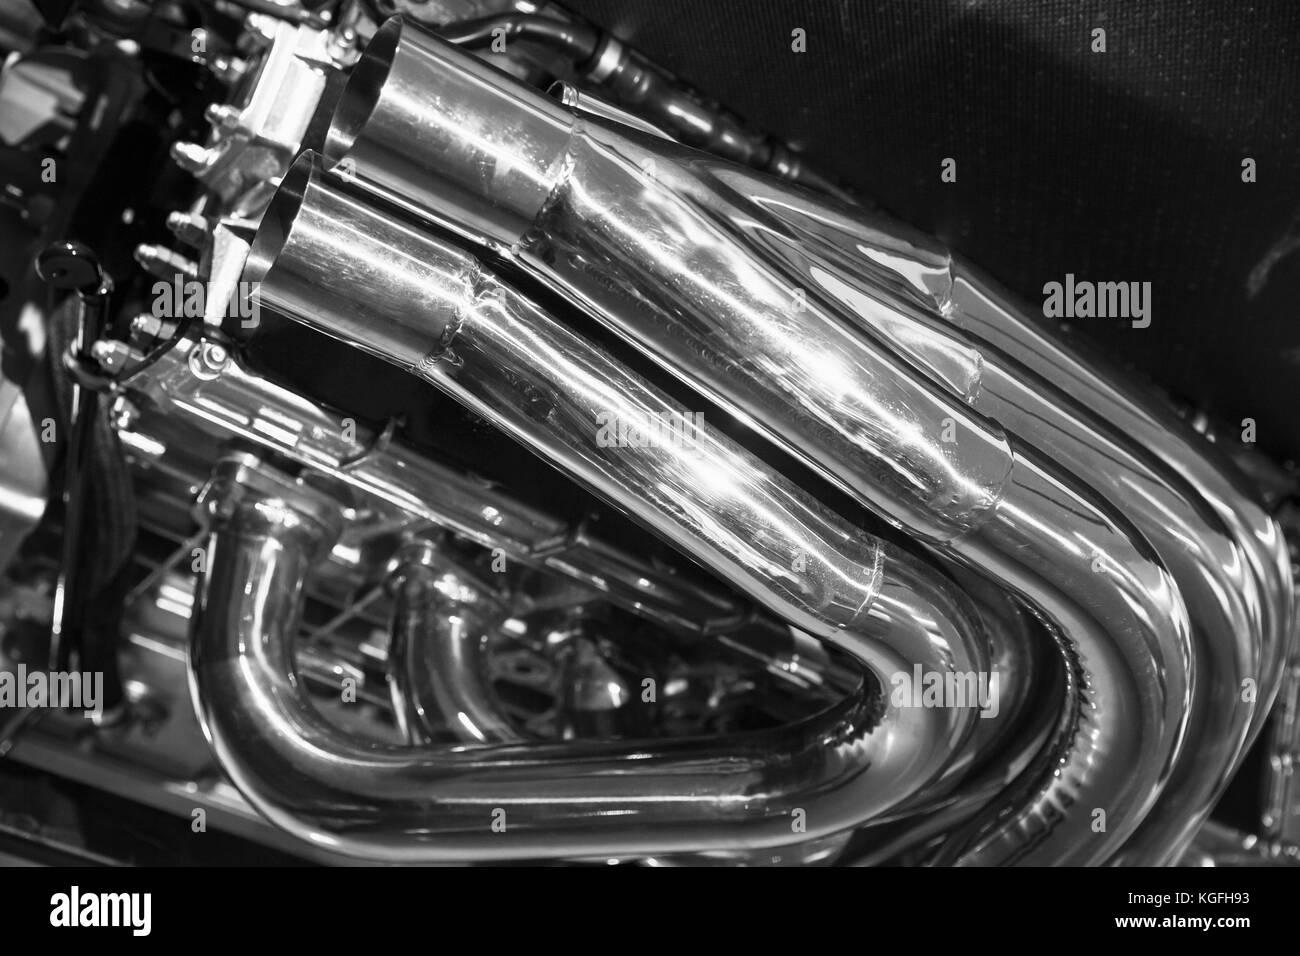 Exhaust pipes. Shiny motor parts, V12 engine fragment, closeup photo with selective focus Stock Photo